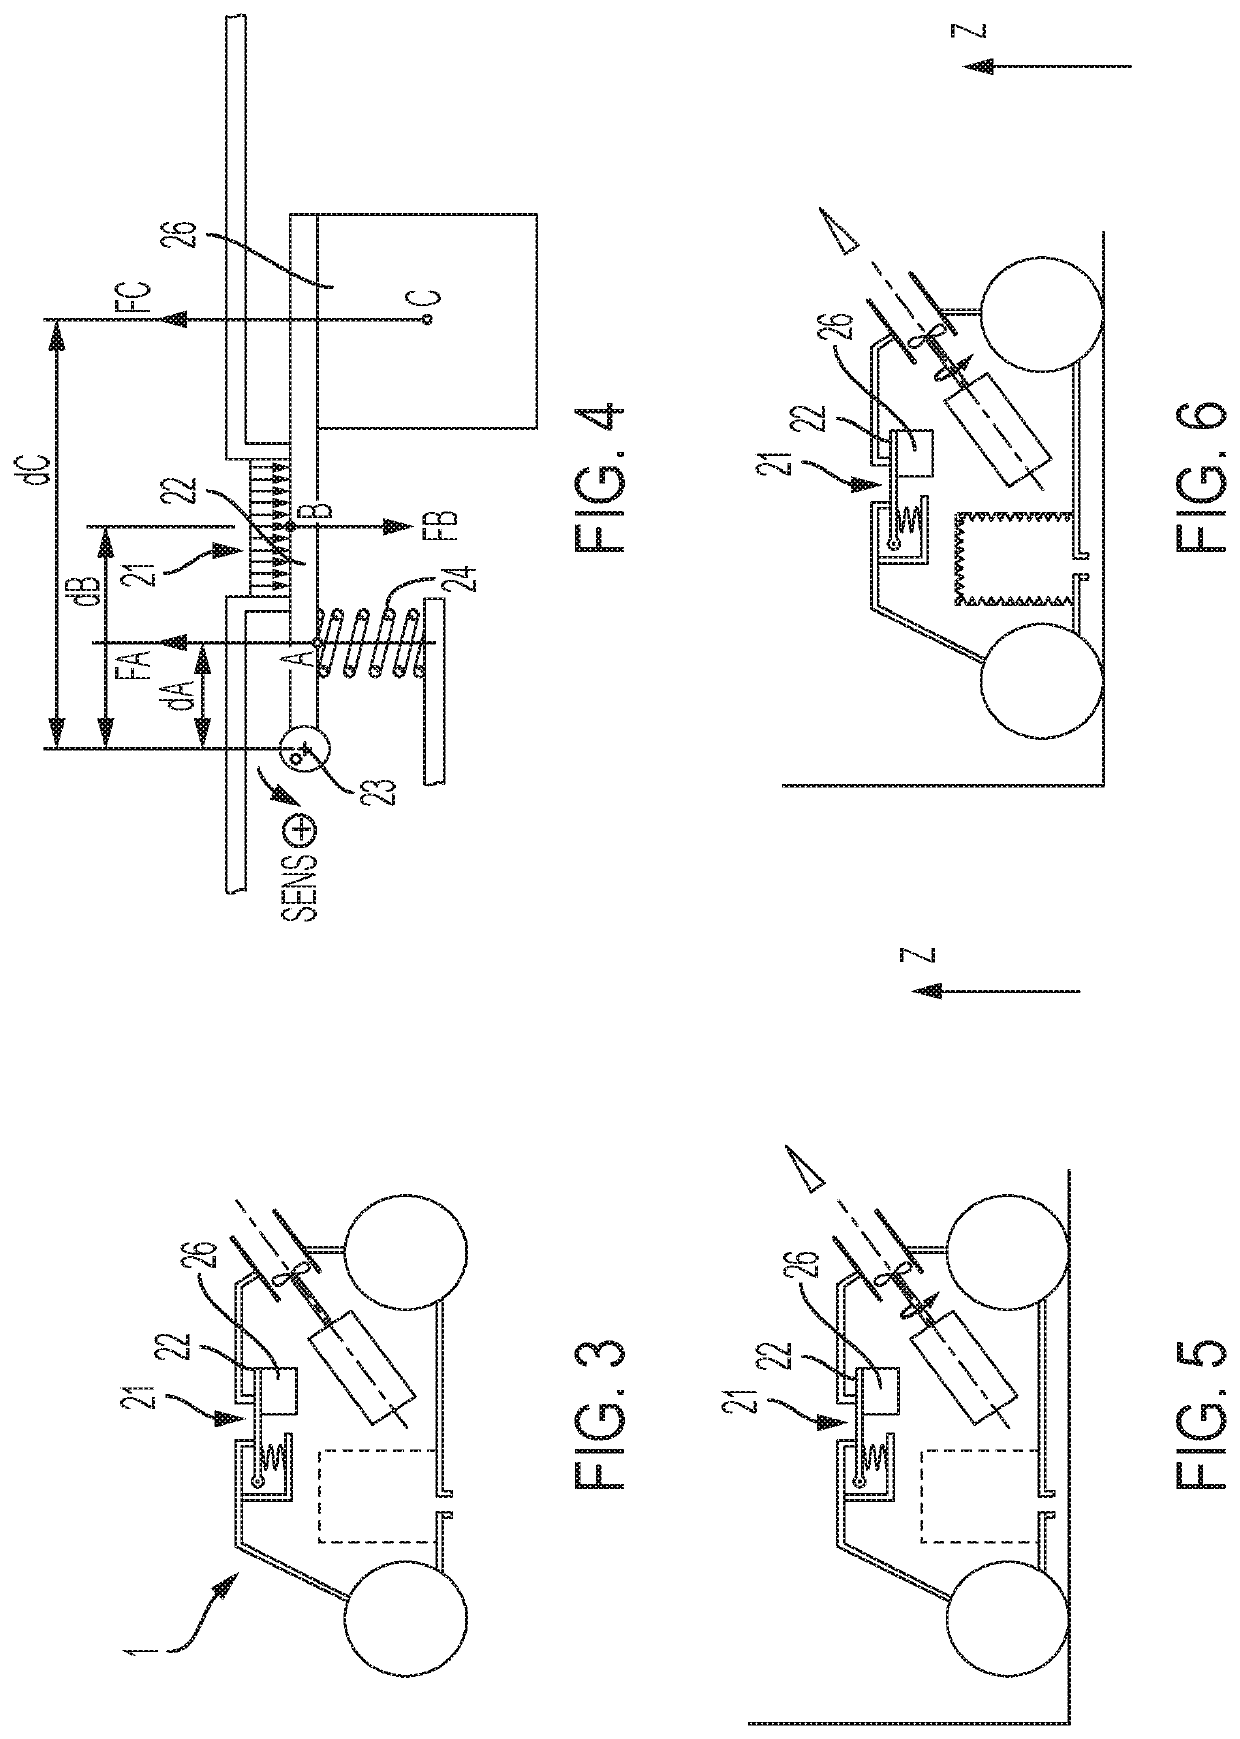 Swimming-pool cleaning apparatus comprising means for adjusting the pressure inside said apparatus